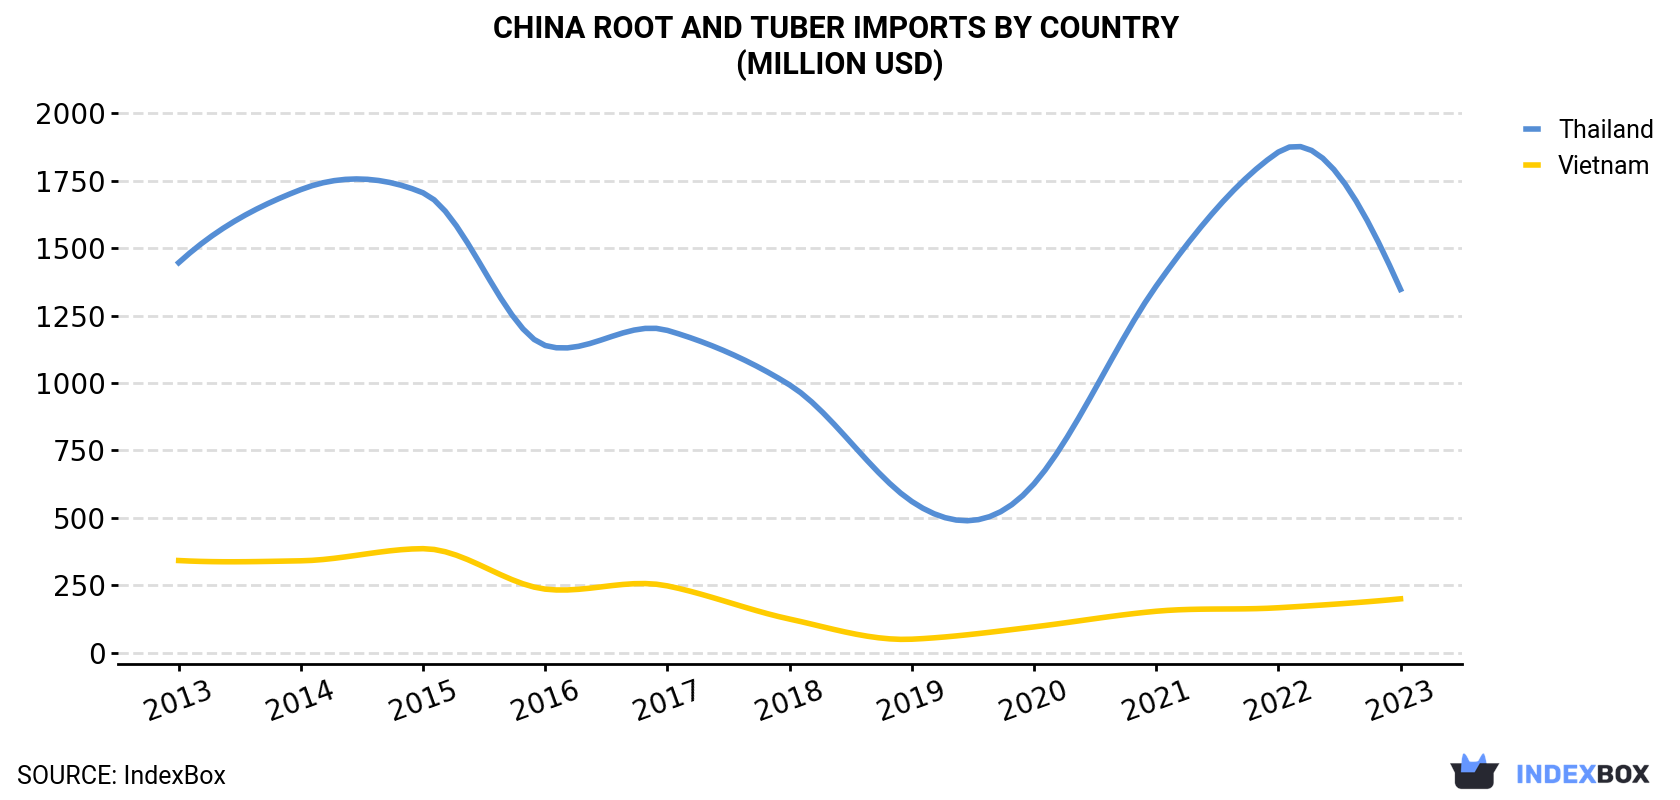 China Root and Tuber Imports By Country (Million USD)